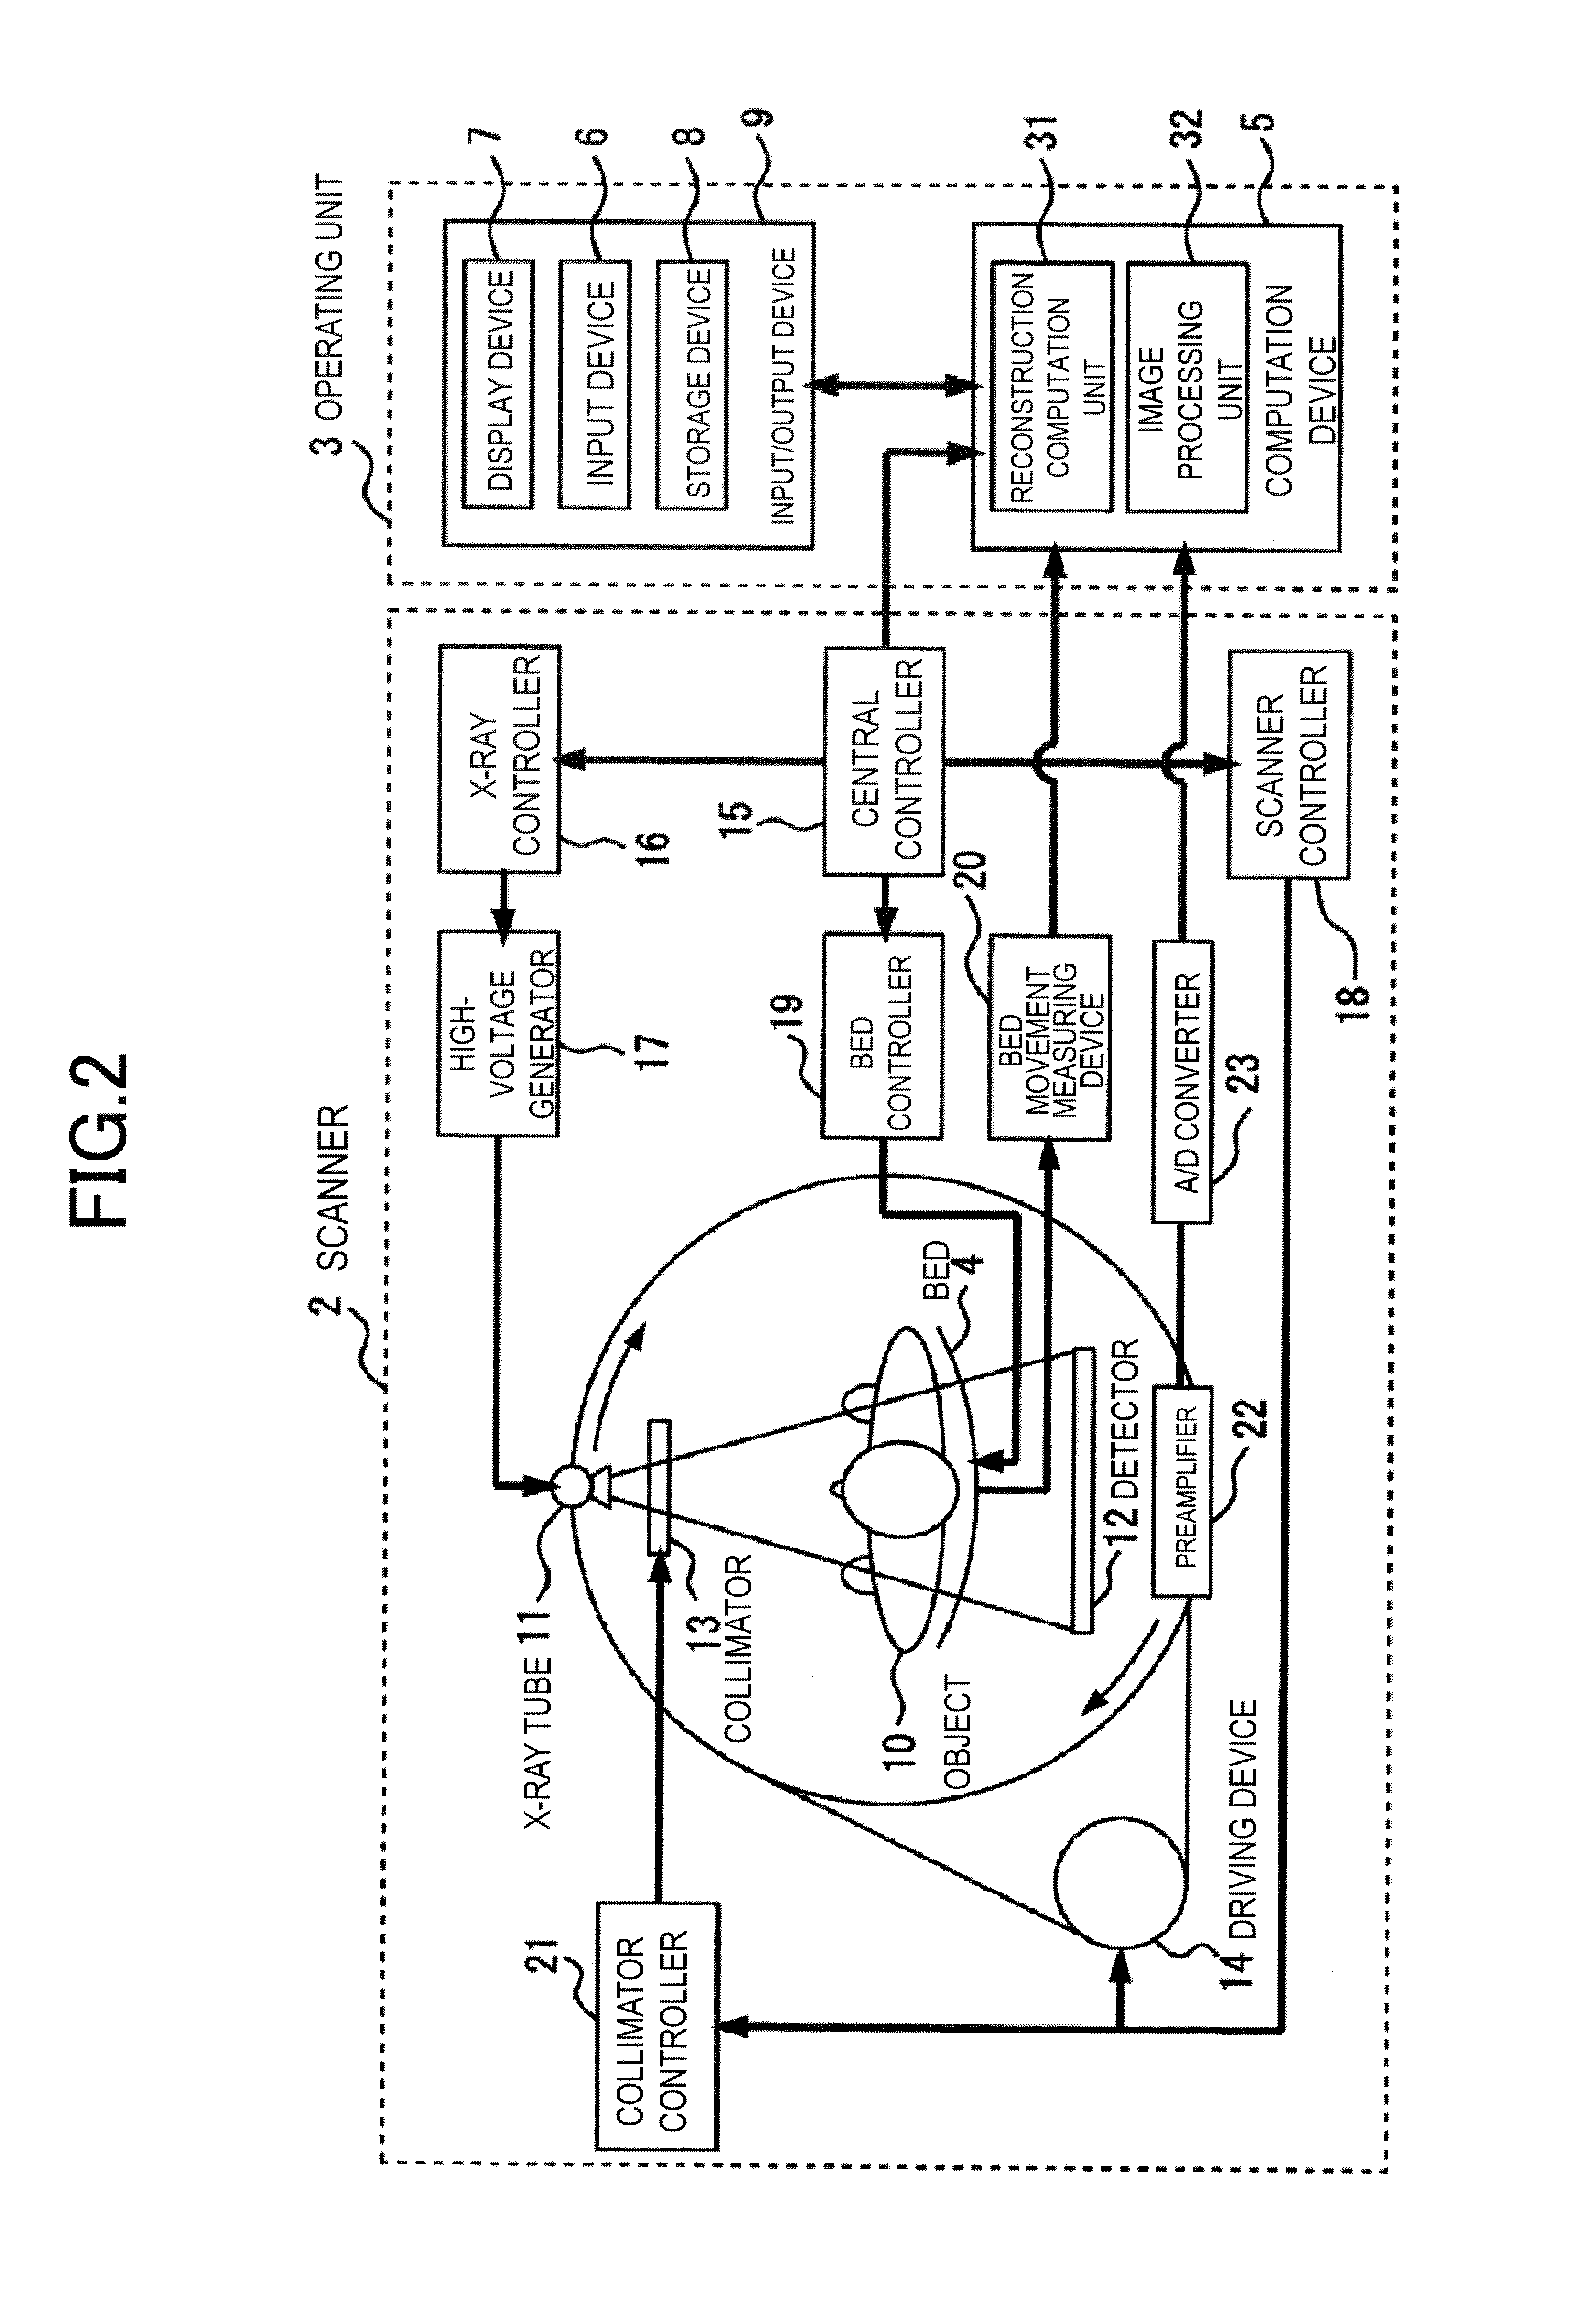 X-ray CT apparatus and image reconstruction method